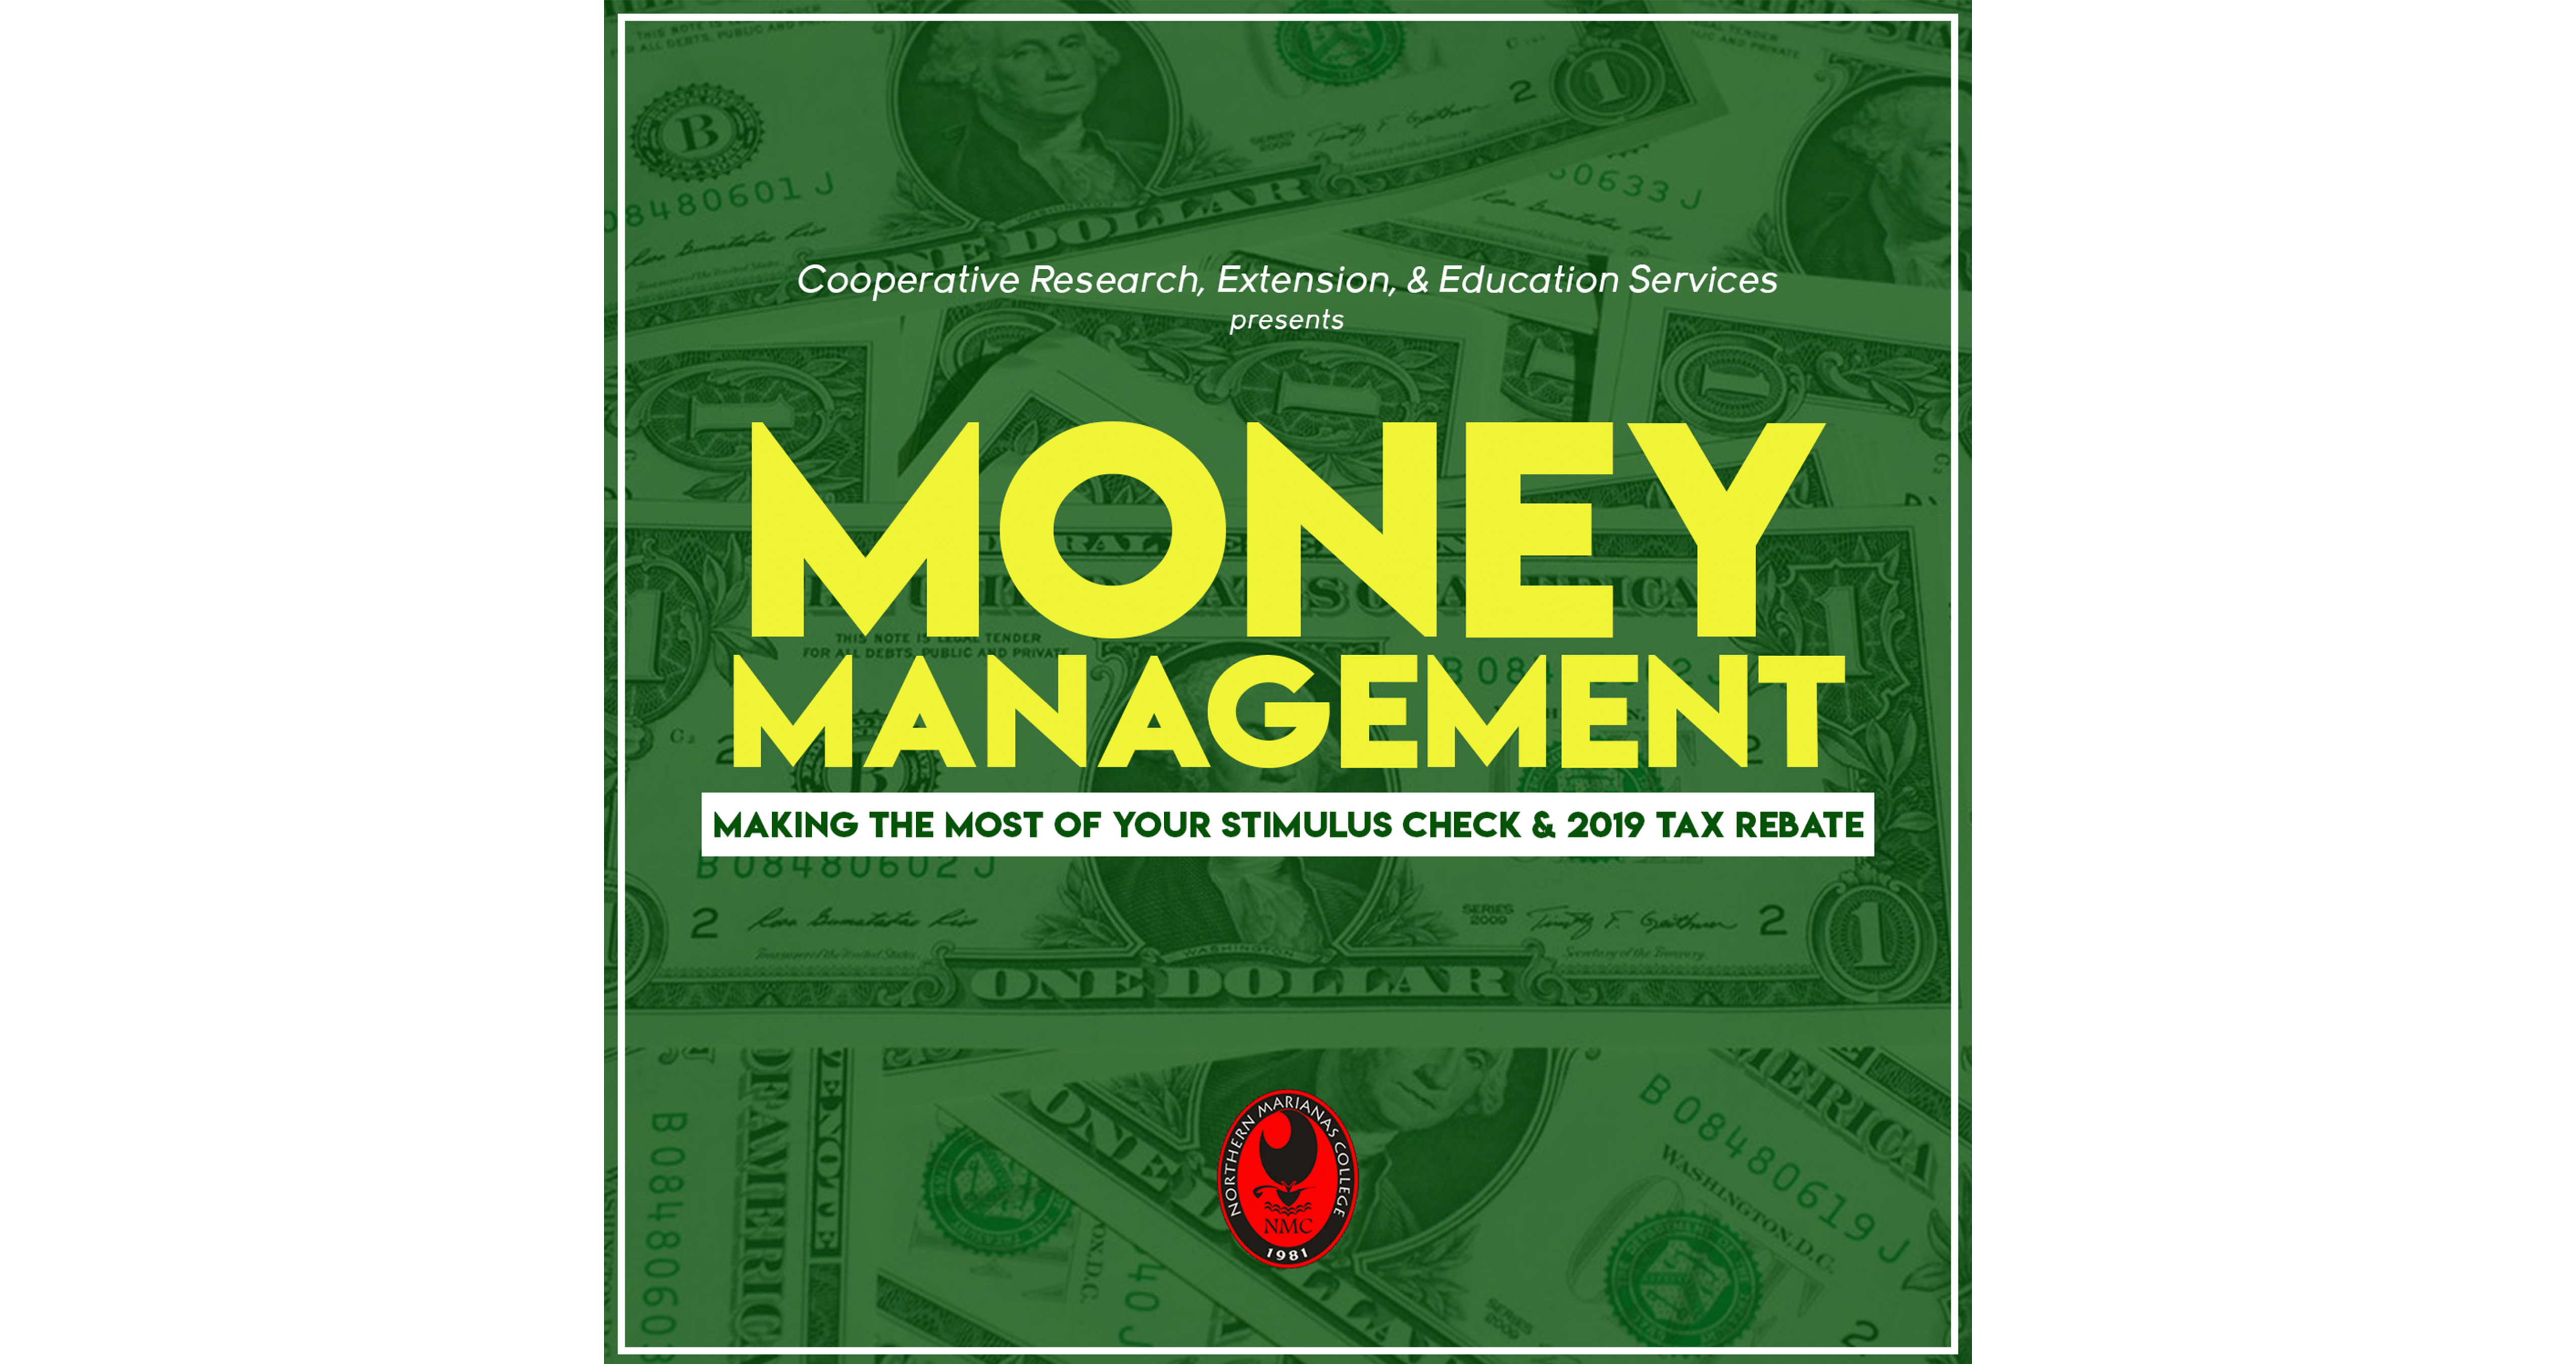 Money Management: Making the Most of Your Stimulus Check & 2019 Tax Rebate